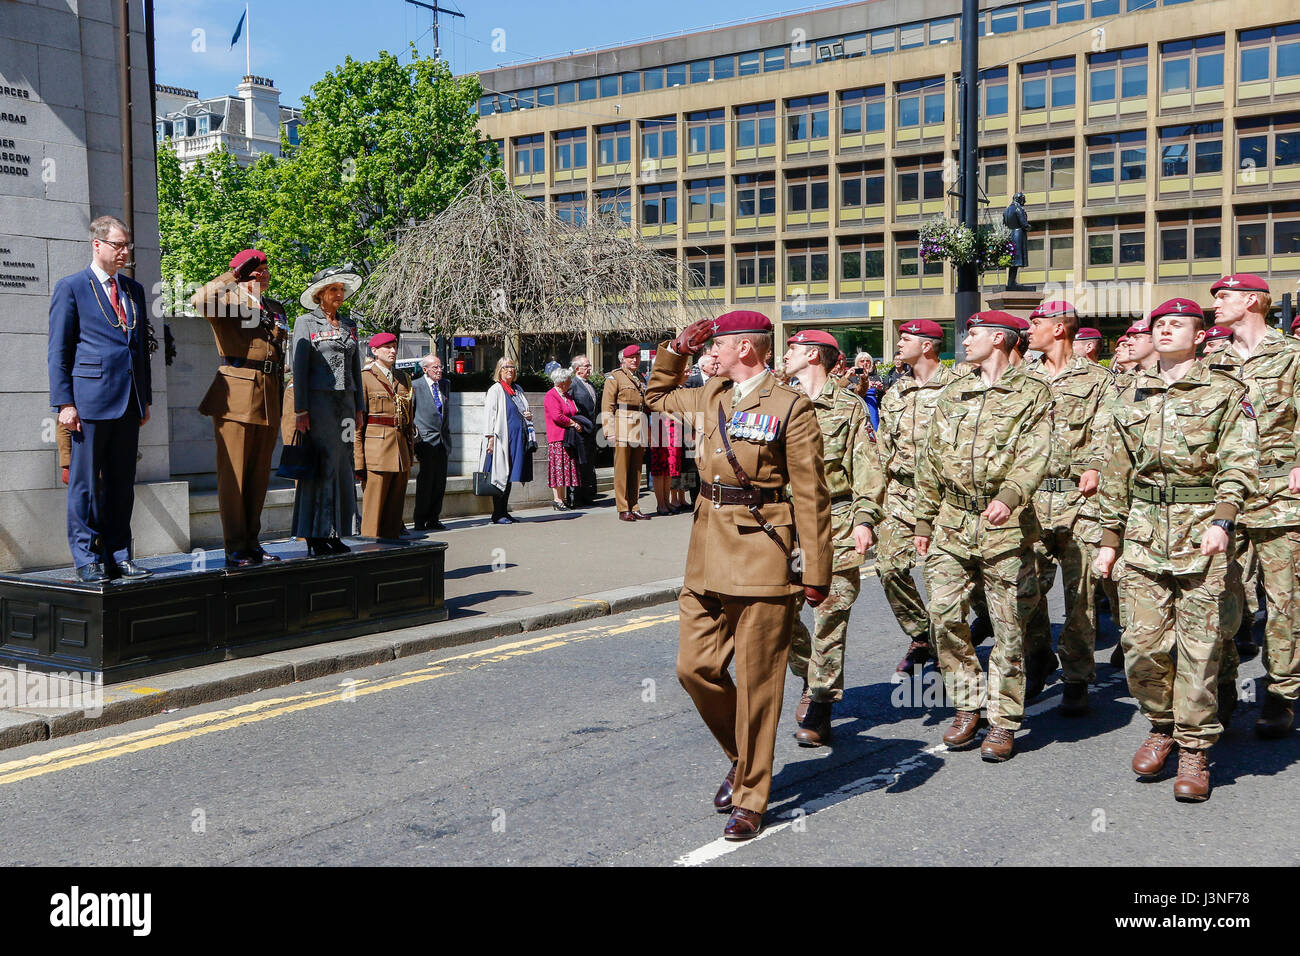 Glasgow, Scotland, UK. 6th May, 2017. To commemorate the 70th anniversary of the forming of XV (Scottish Volunteer) battalion of the Parachute Regiment, later to be known as '4 Para', a service was held at Glasgow cathedral followed by a march through the city, led by the Parachute Regiments mascot, a Shetland pony called Pegasus. The march finished in George Square where there as a march past and salute followed by an address by Lt Colonel Pat Conn OBE. Credit: Findlay/Alamy Live News Stock Photo